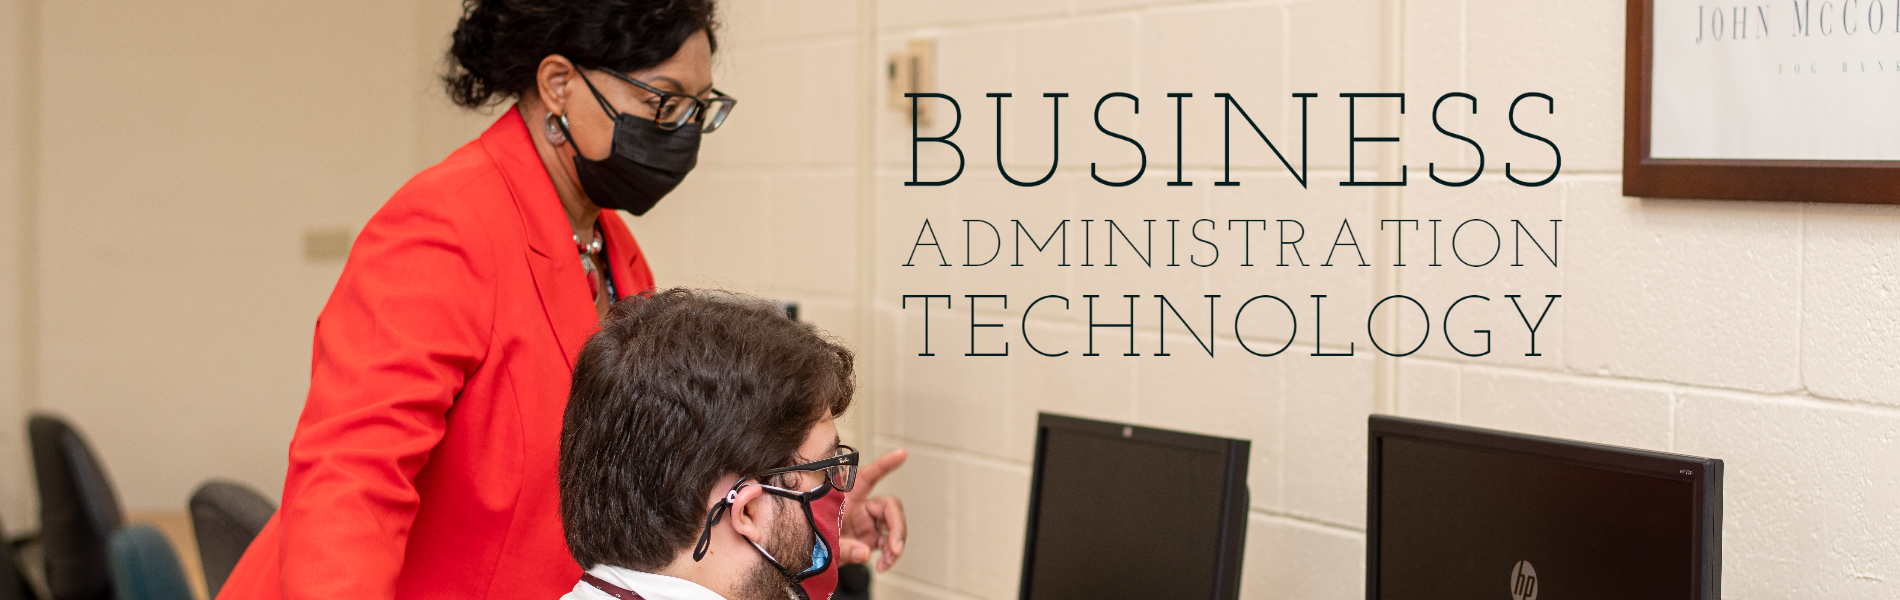 Business Administration Technology